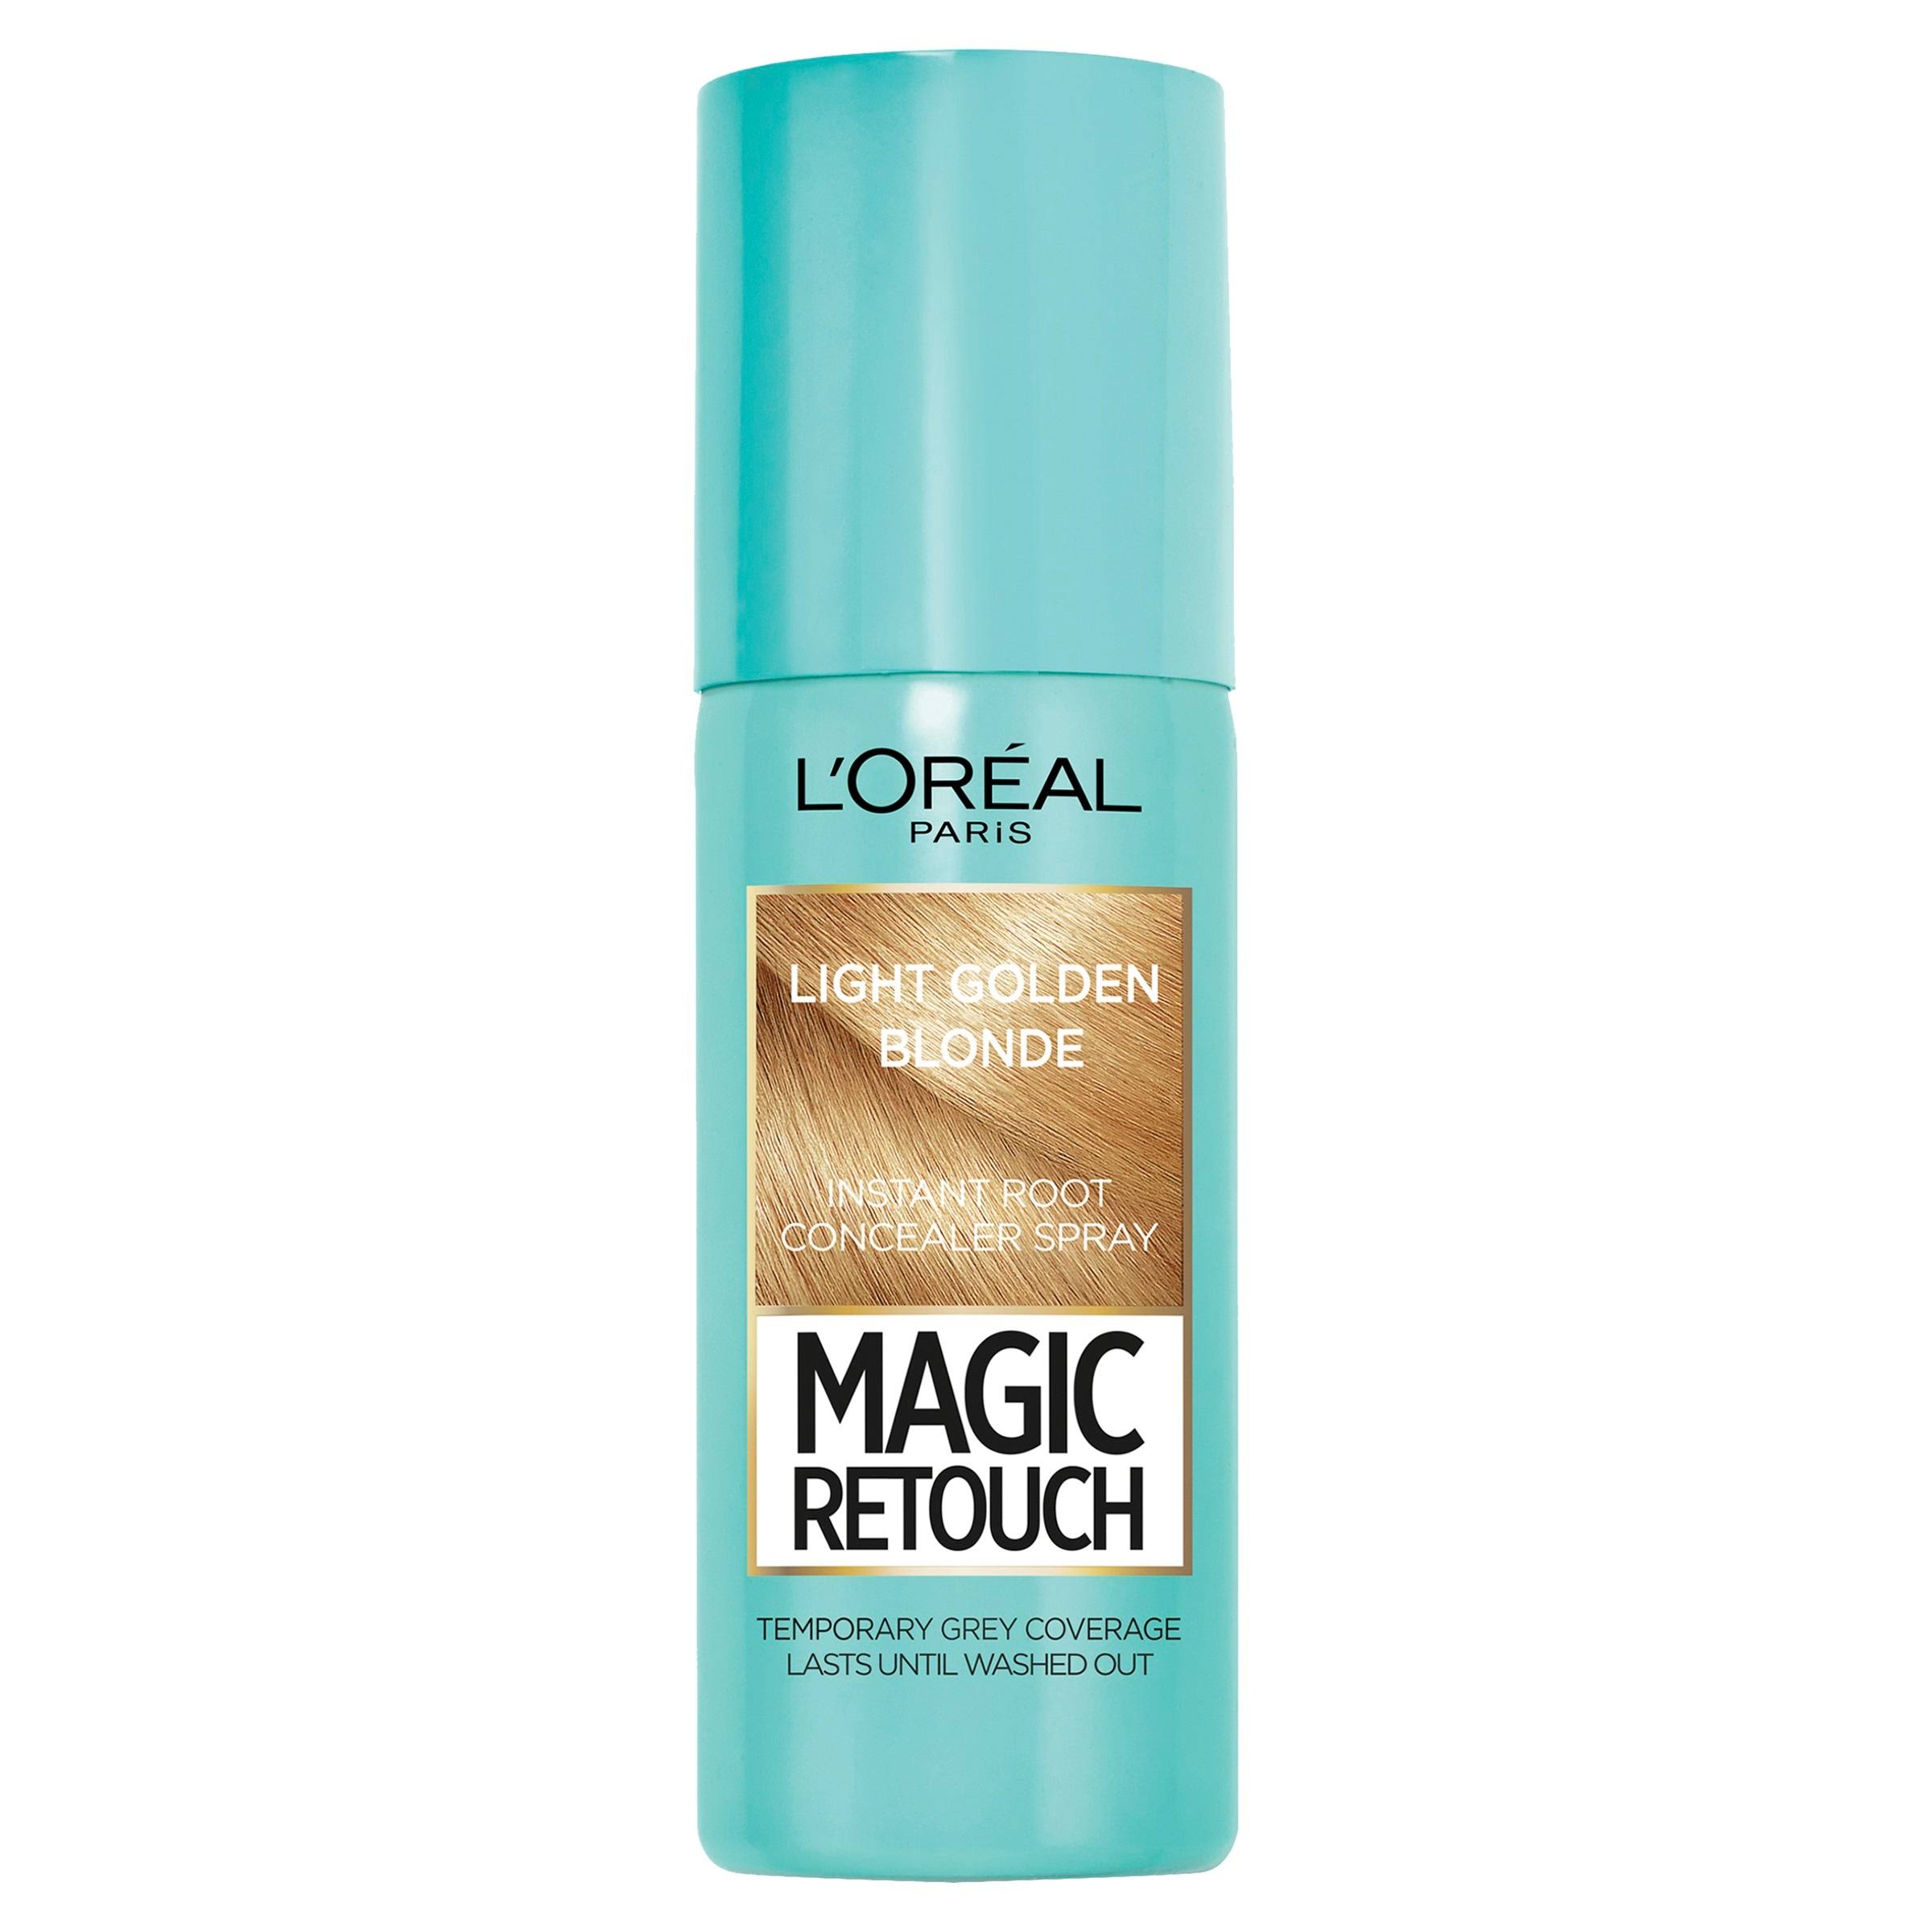 L'Oreal Magic Retouch Temporary Instant Grey Root Concealer Spray - Light Golden Blonde, 75ml